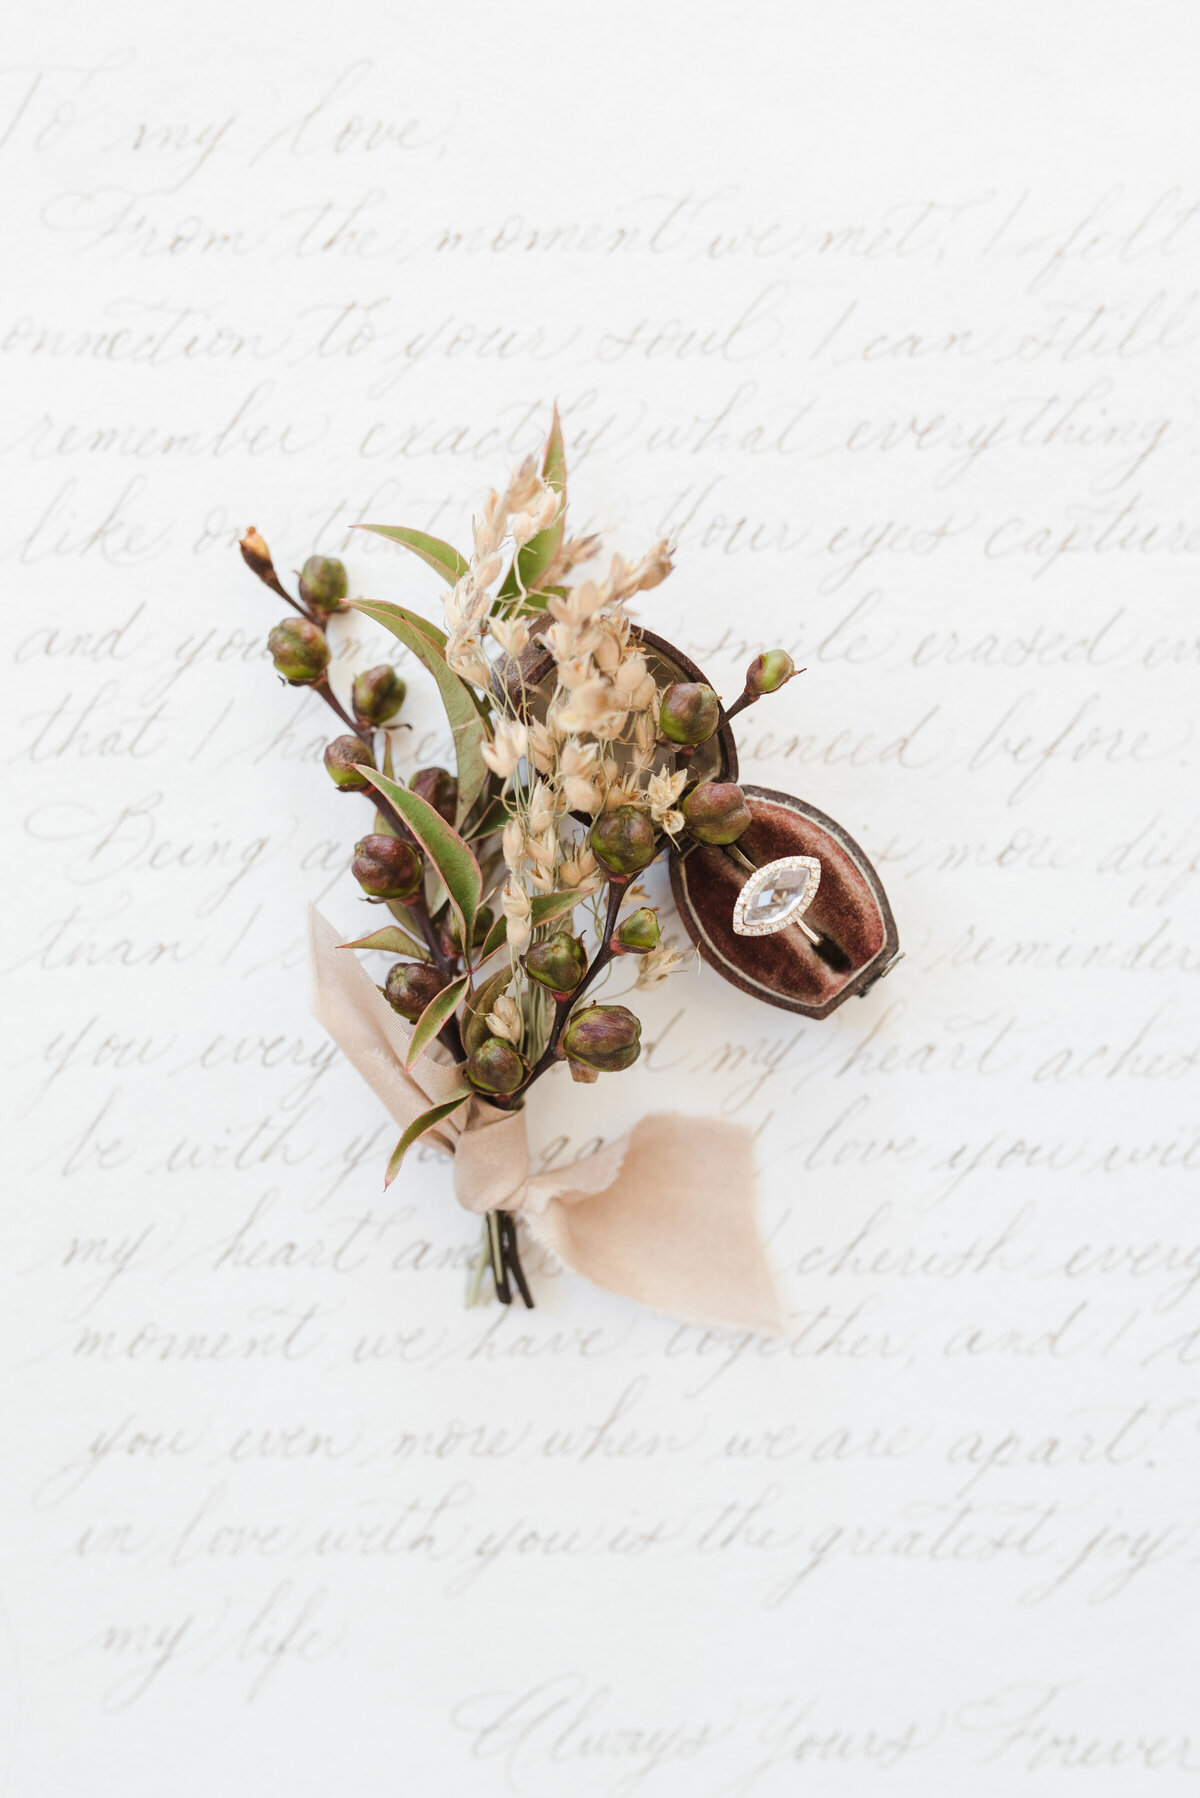 Dried flower boutonniere sitting on top of a white sheet of paper with calligraphy